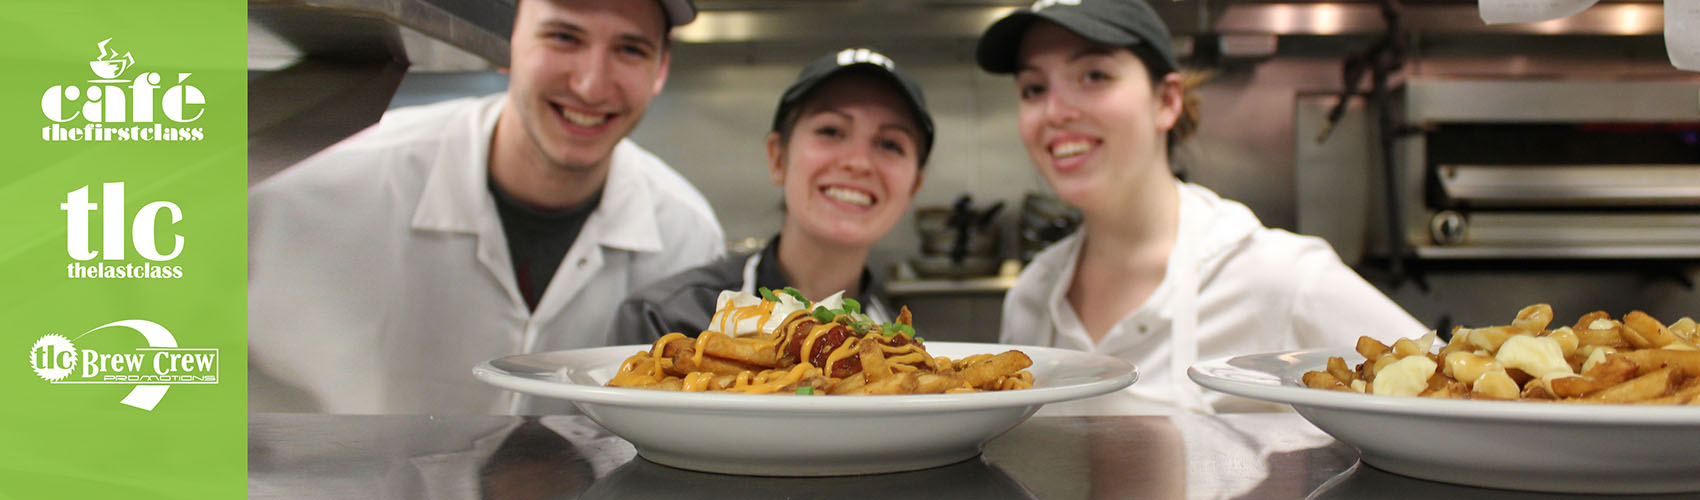 Three chefs in a kitchen, serving up plates of poutine